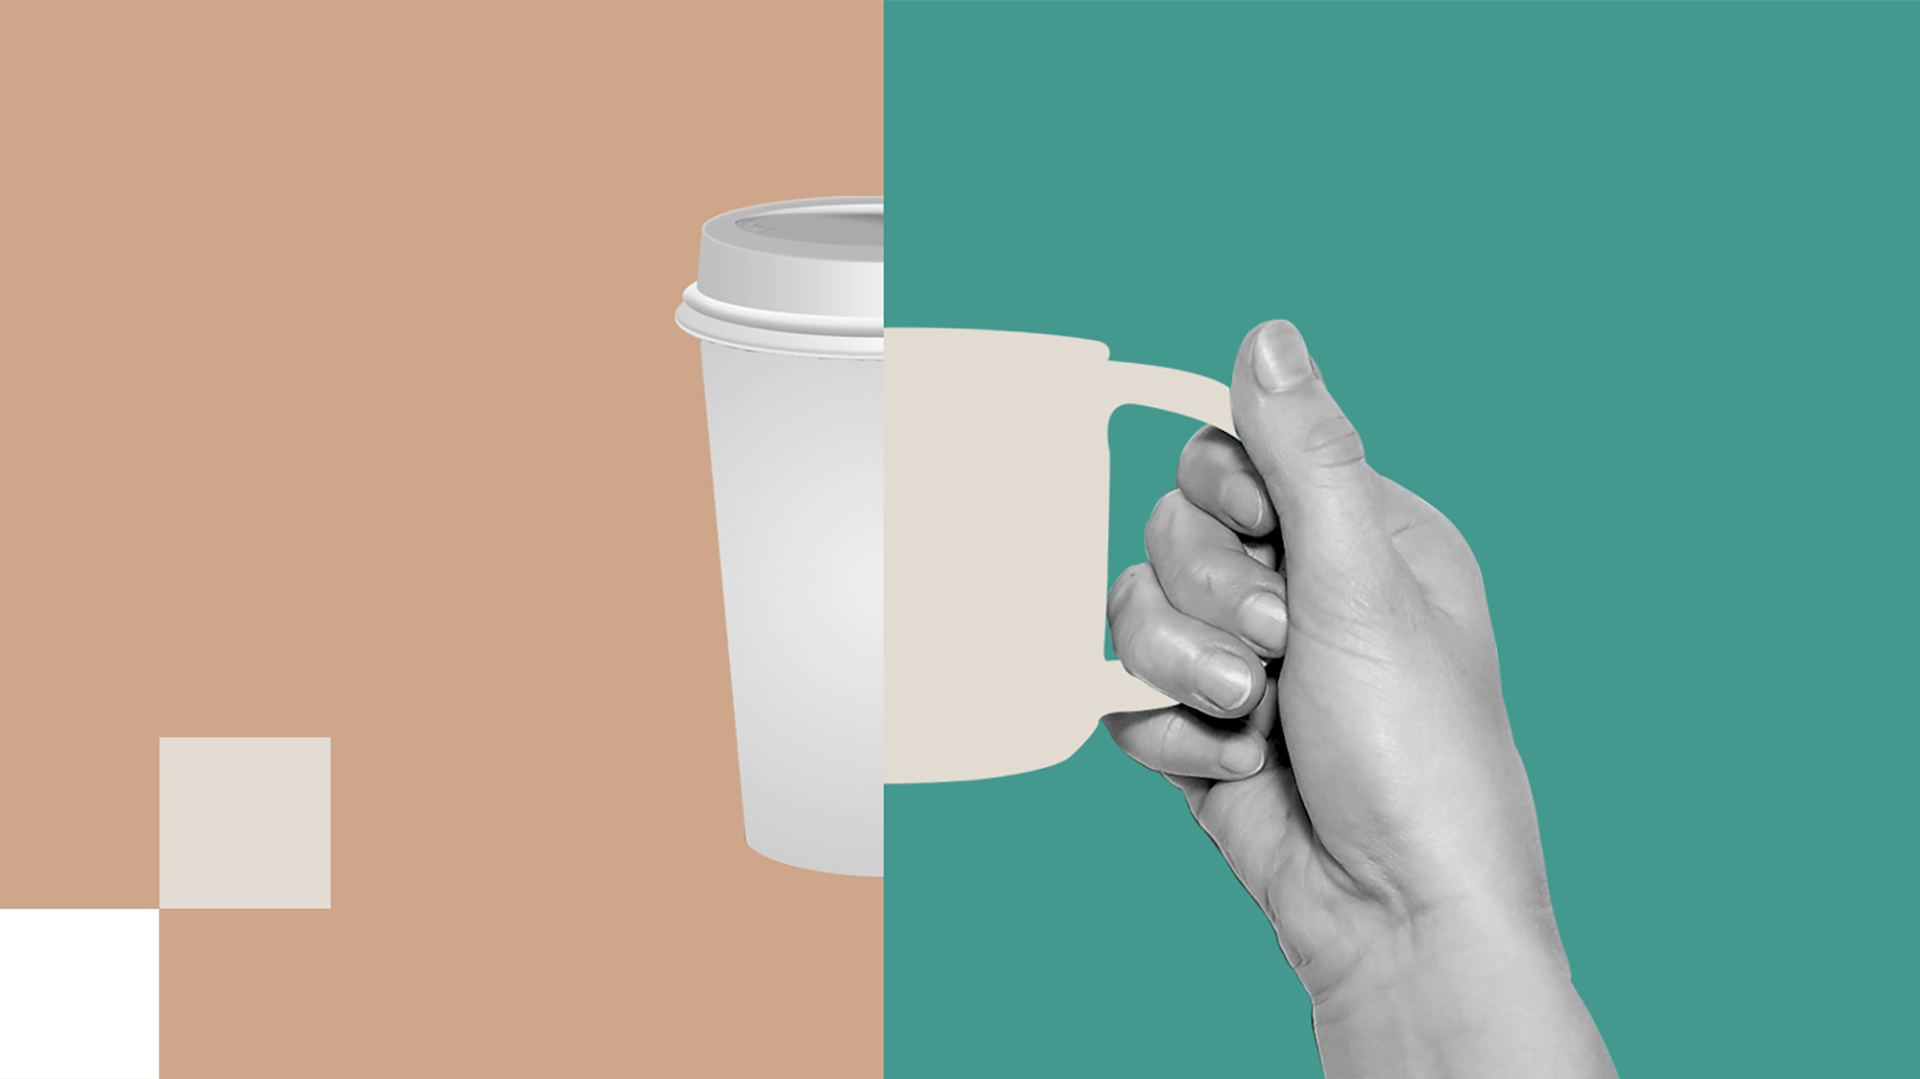 Illustration hand holding mug combined with a to-go coffee cup